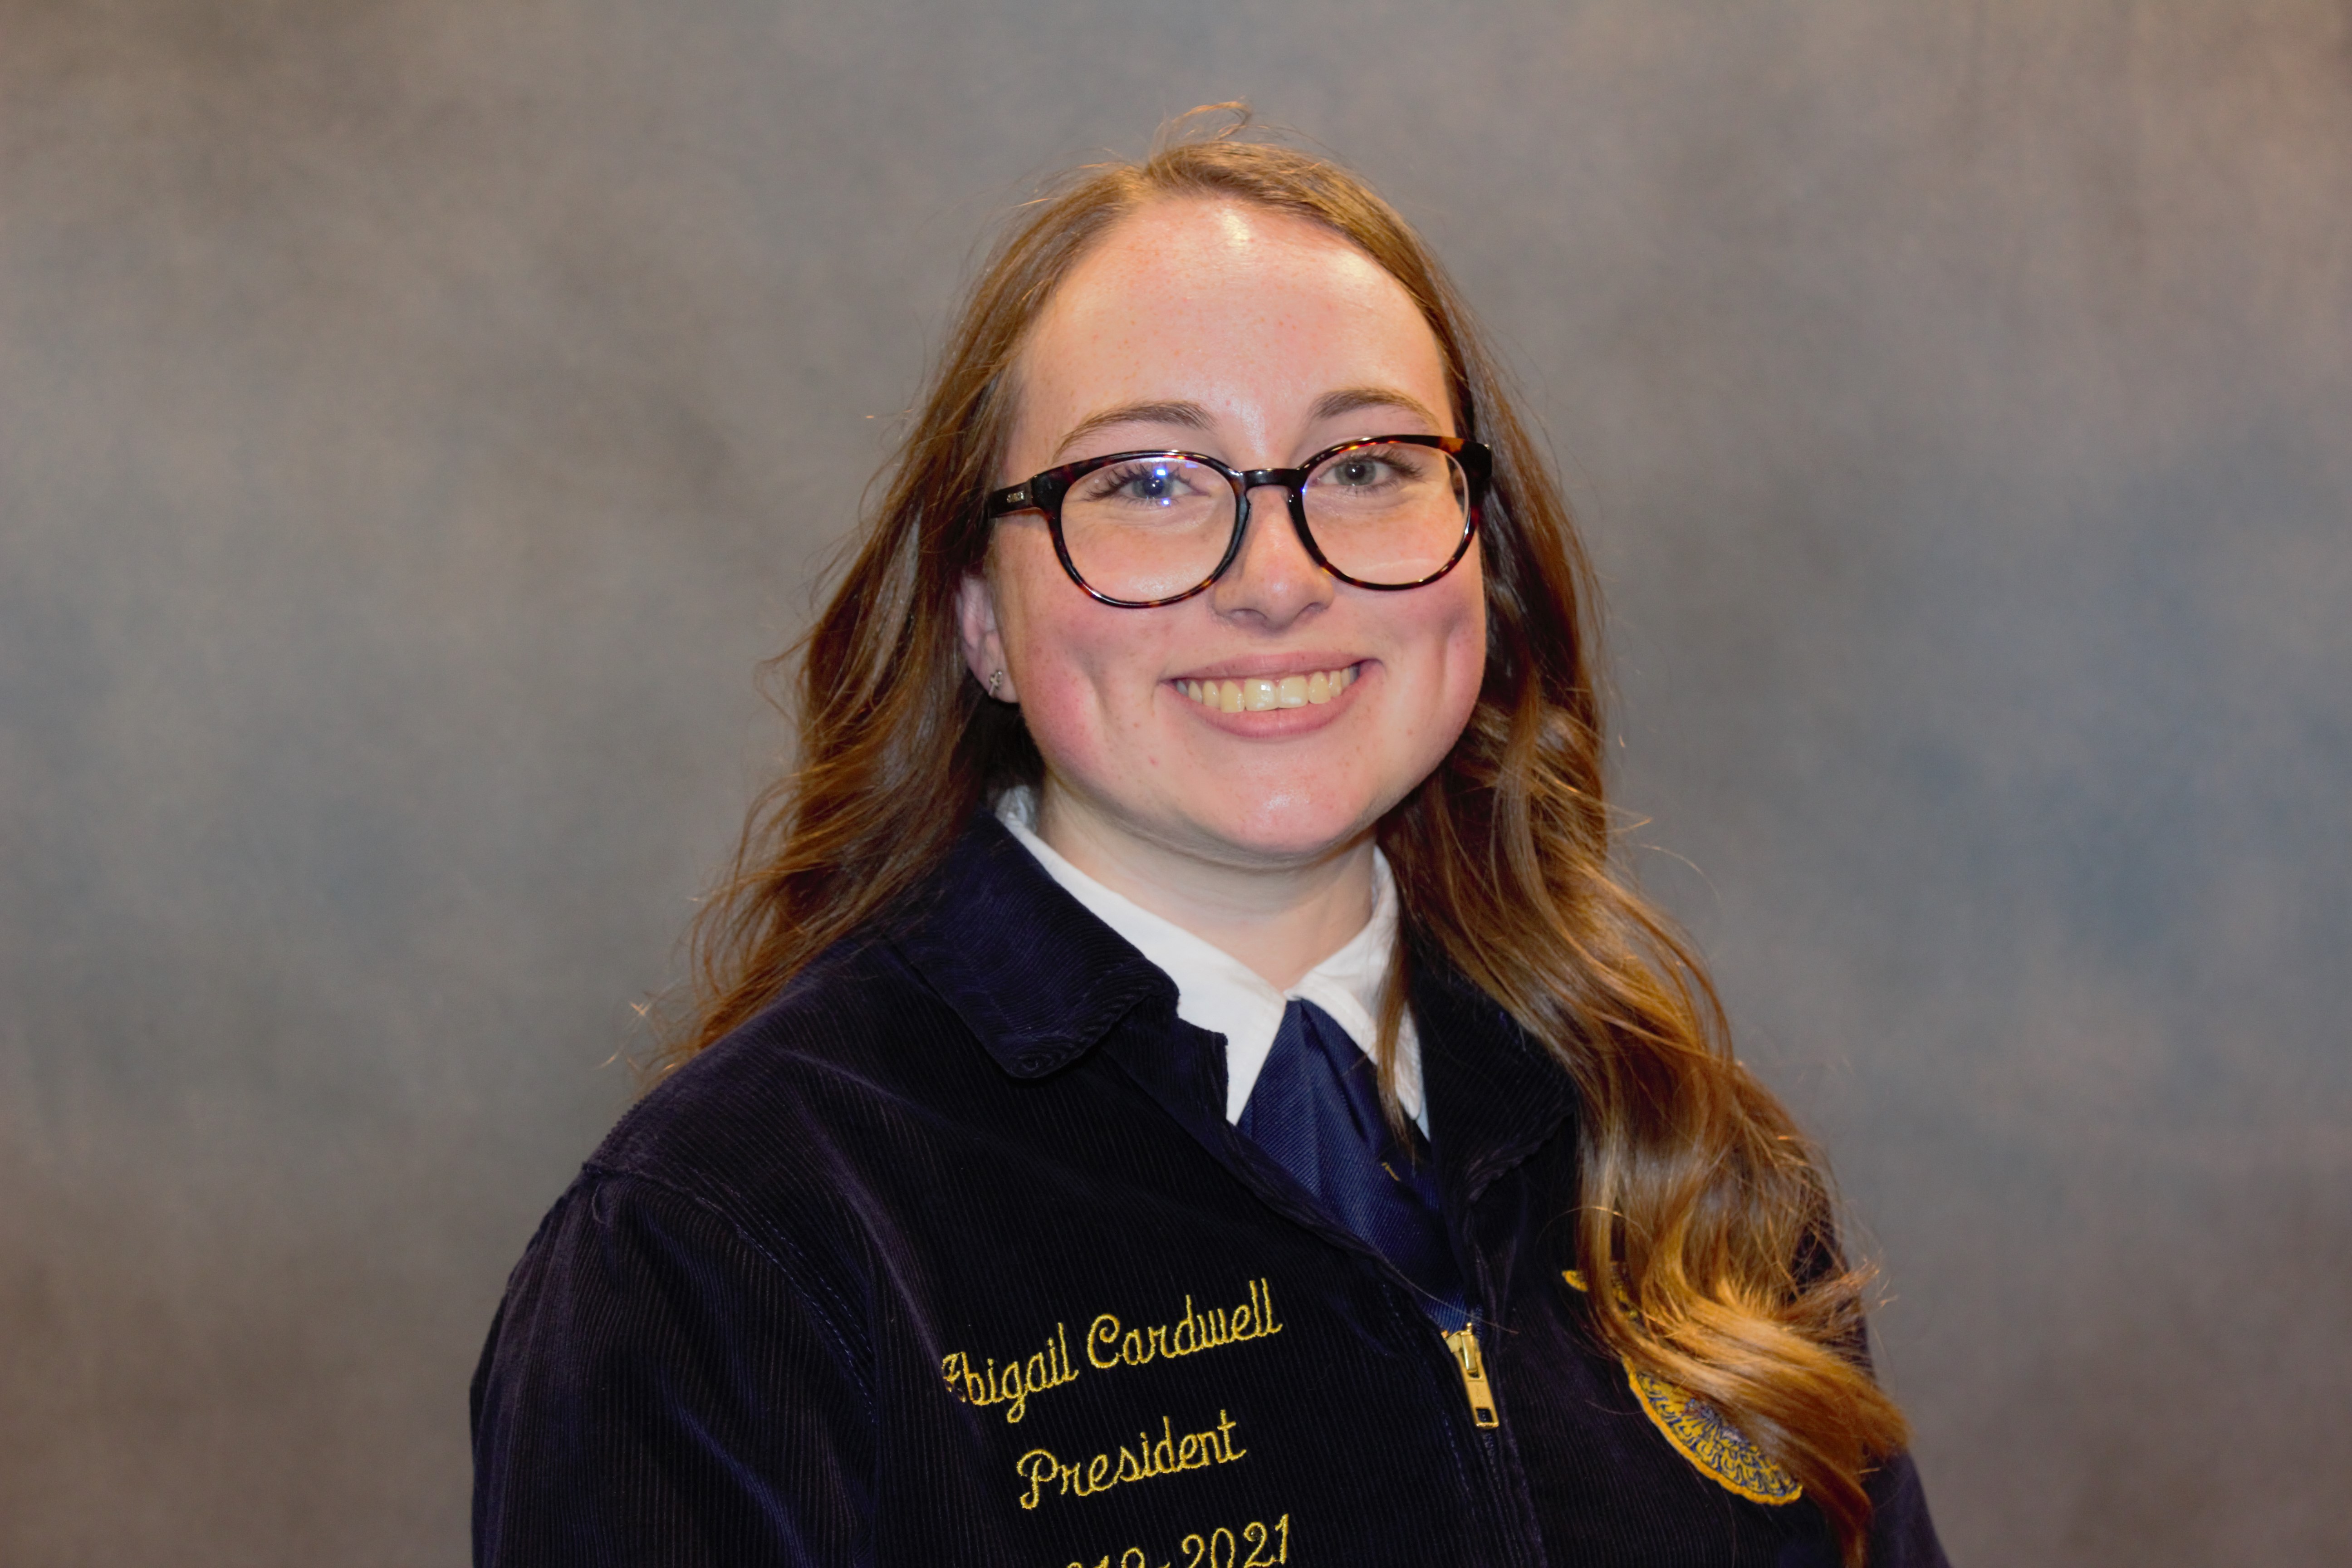 Introducing Abby Cardwell of the Deer Creek Lamont FFA Chapter, Your 2021 Northwest Area Star in Agriscience